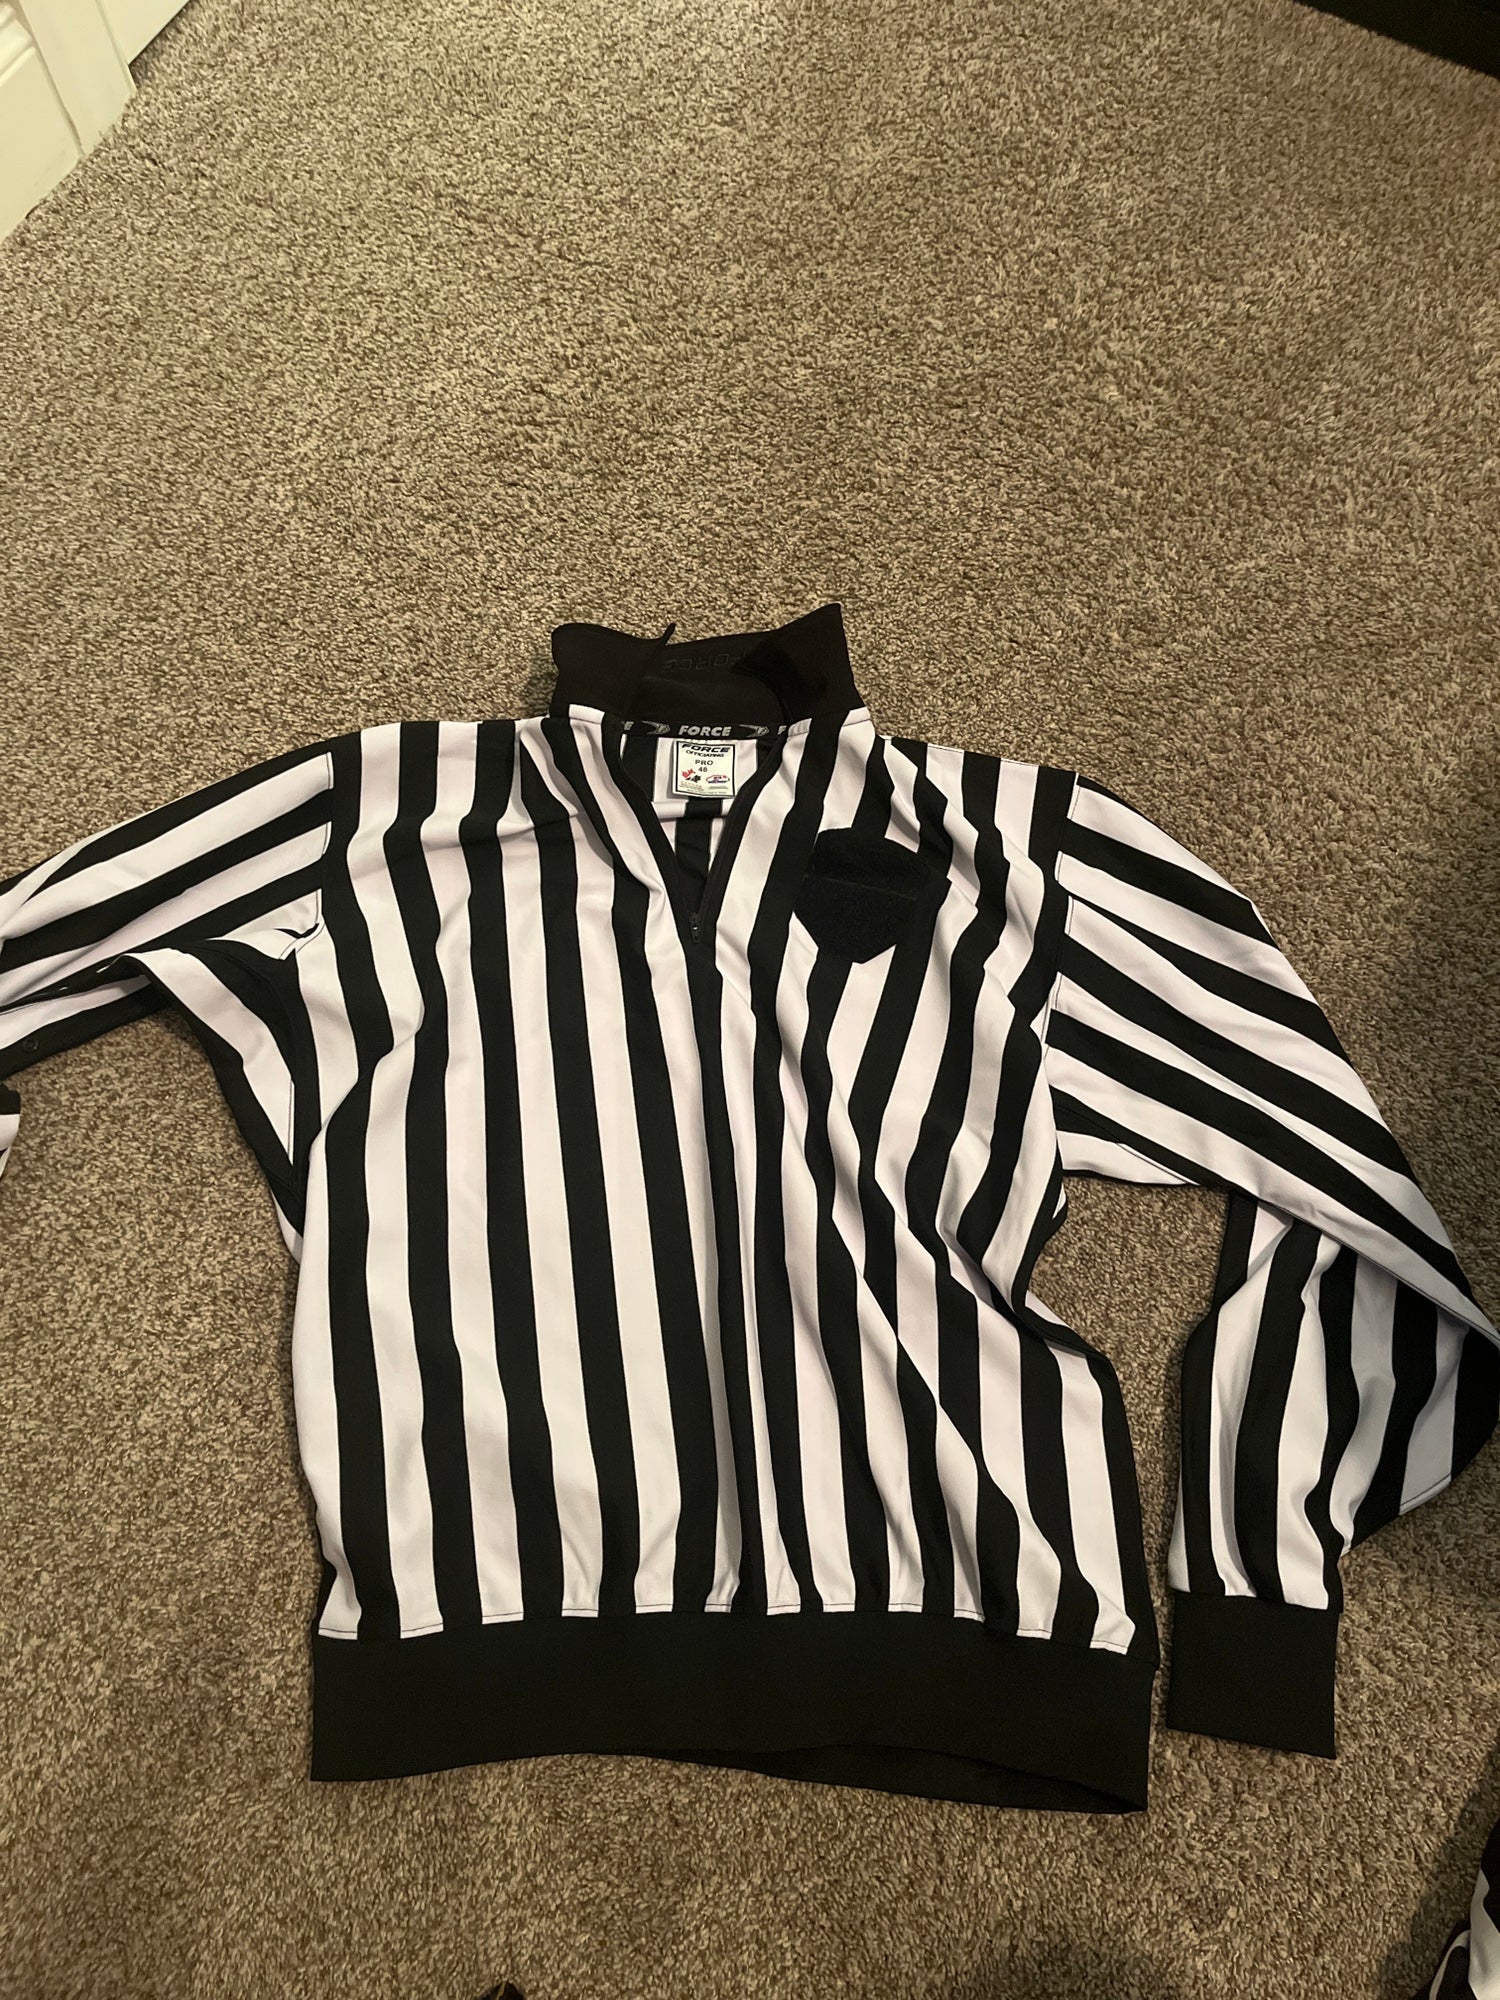 FORCE ELITE Pro Referee Jersey with black sleeve inserts and sewn-in  bands. Red or Orange